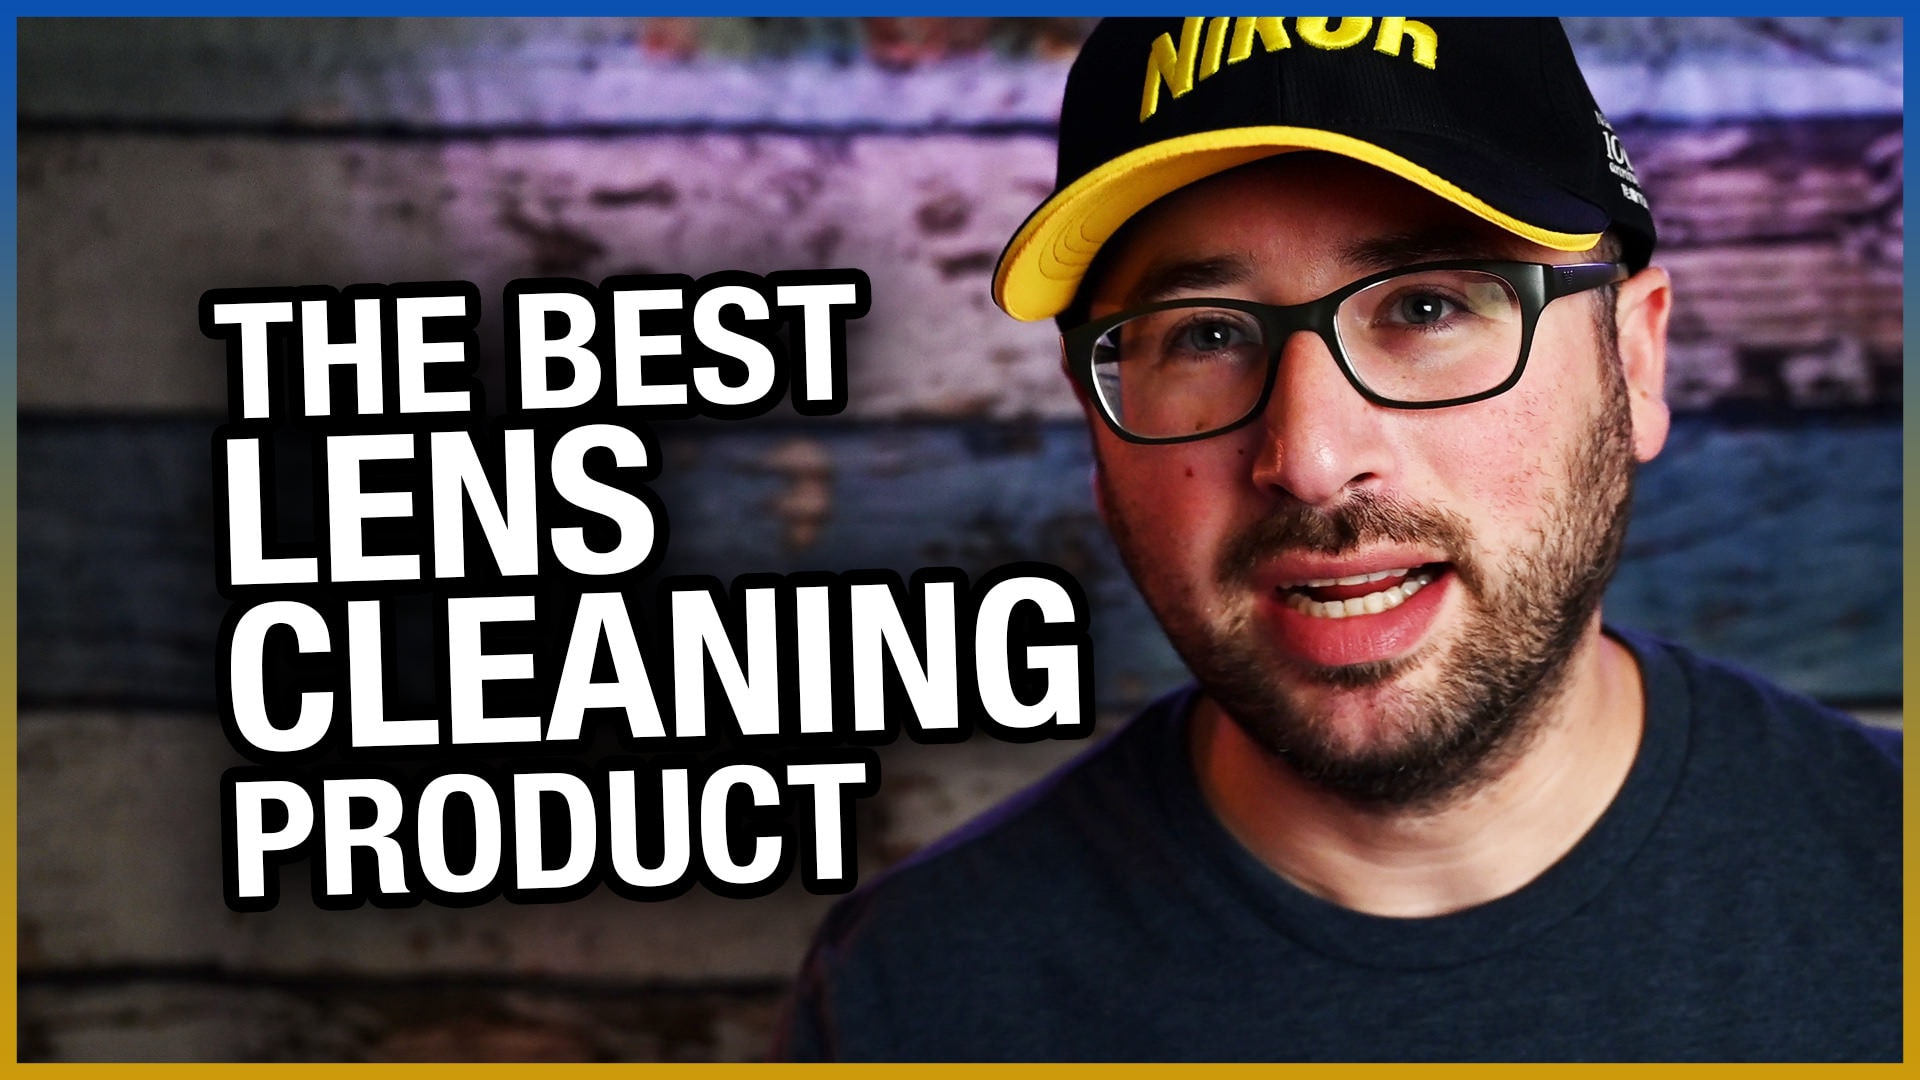 Lens Cleaning Wipes - The best lens cleaning product